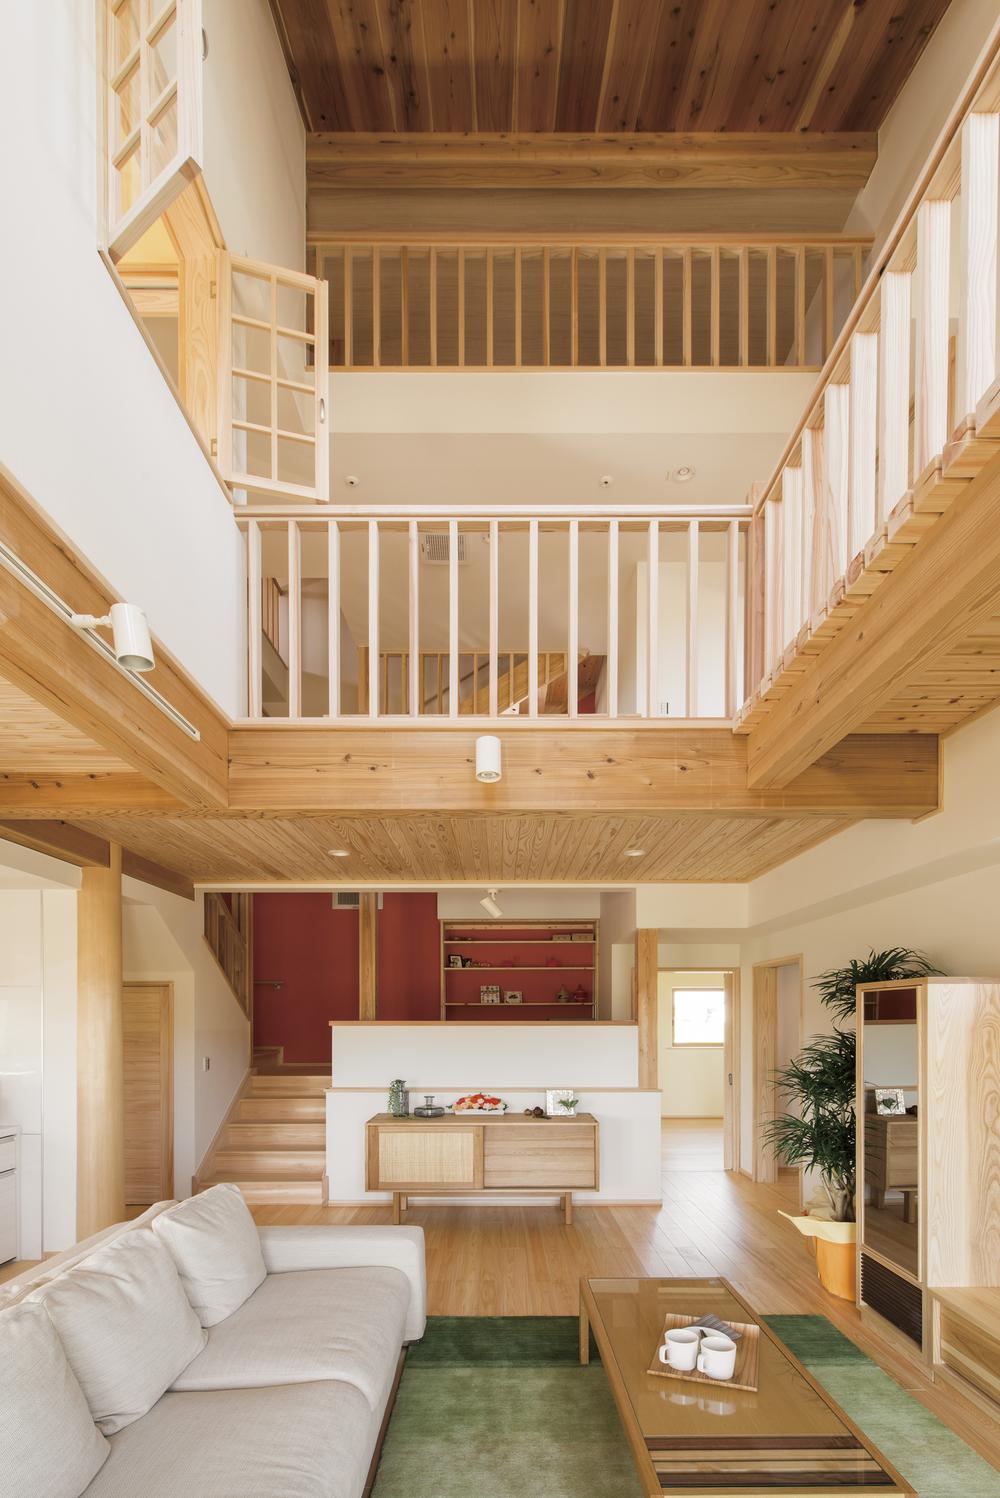 Model house photo. It opens a large space that continues to research school model house attic storage. Throughout your entire home is the space of human connection. 